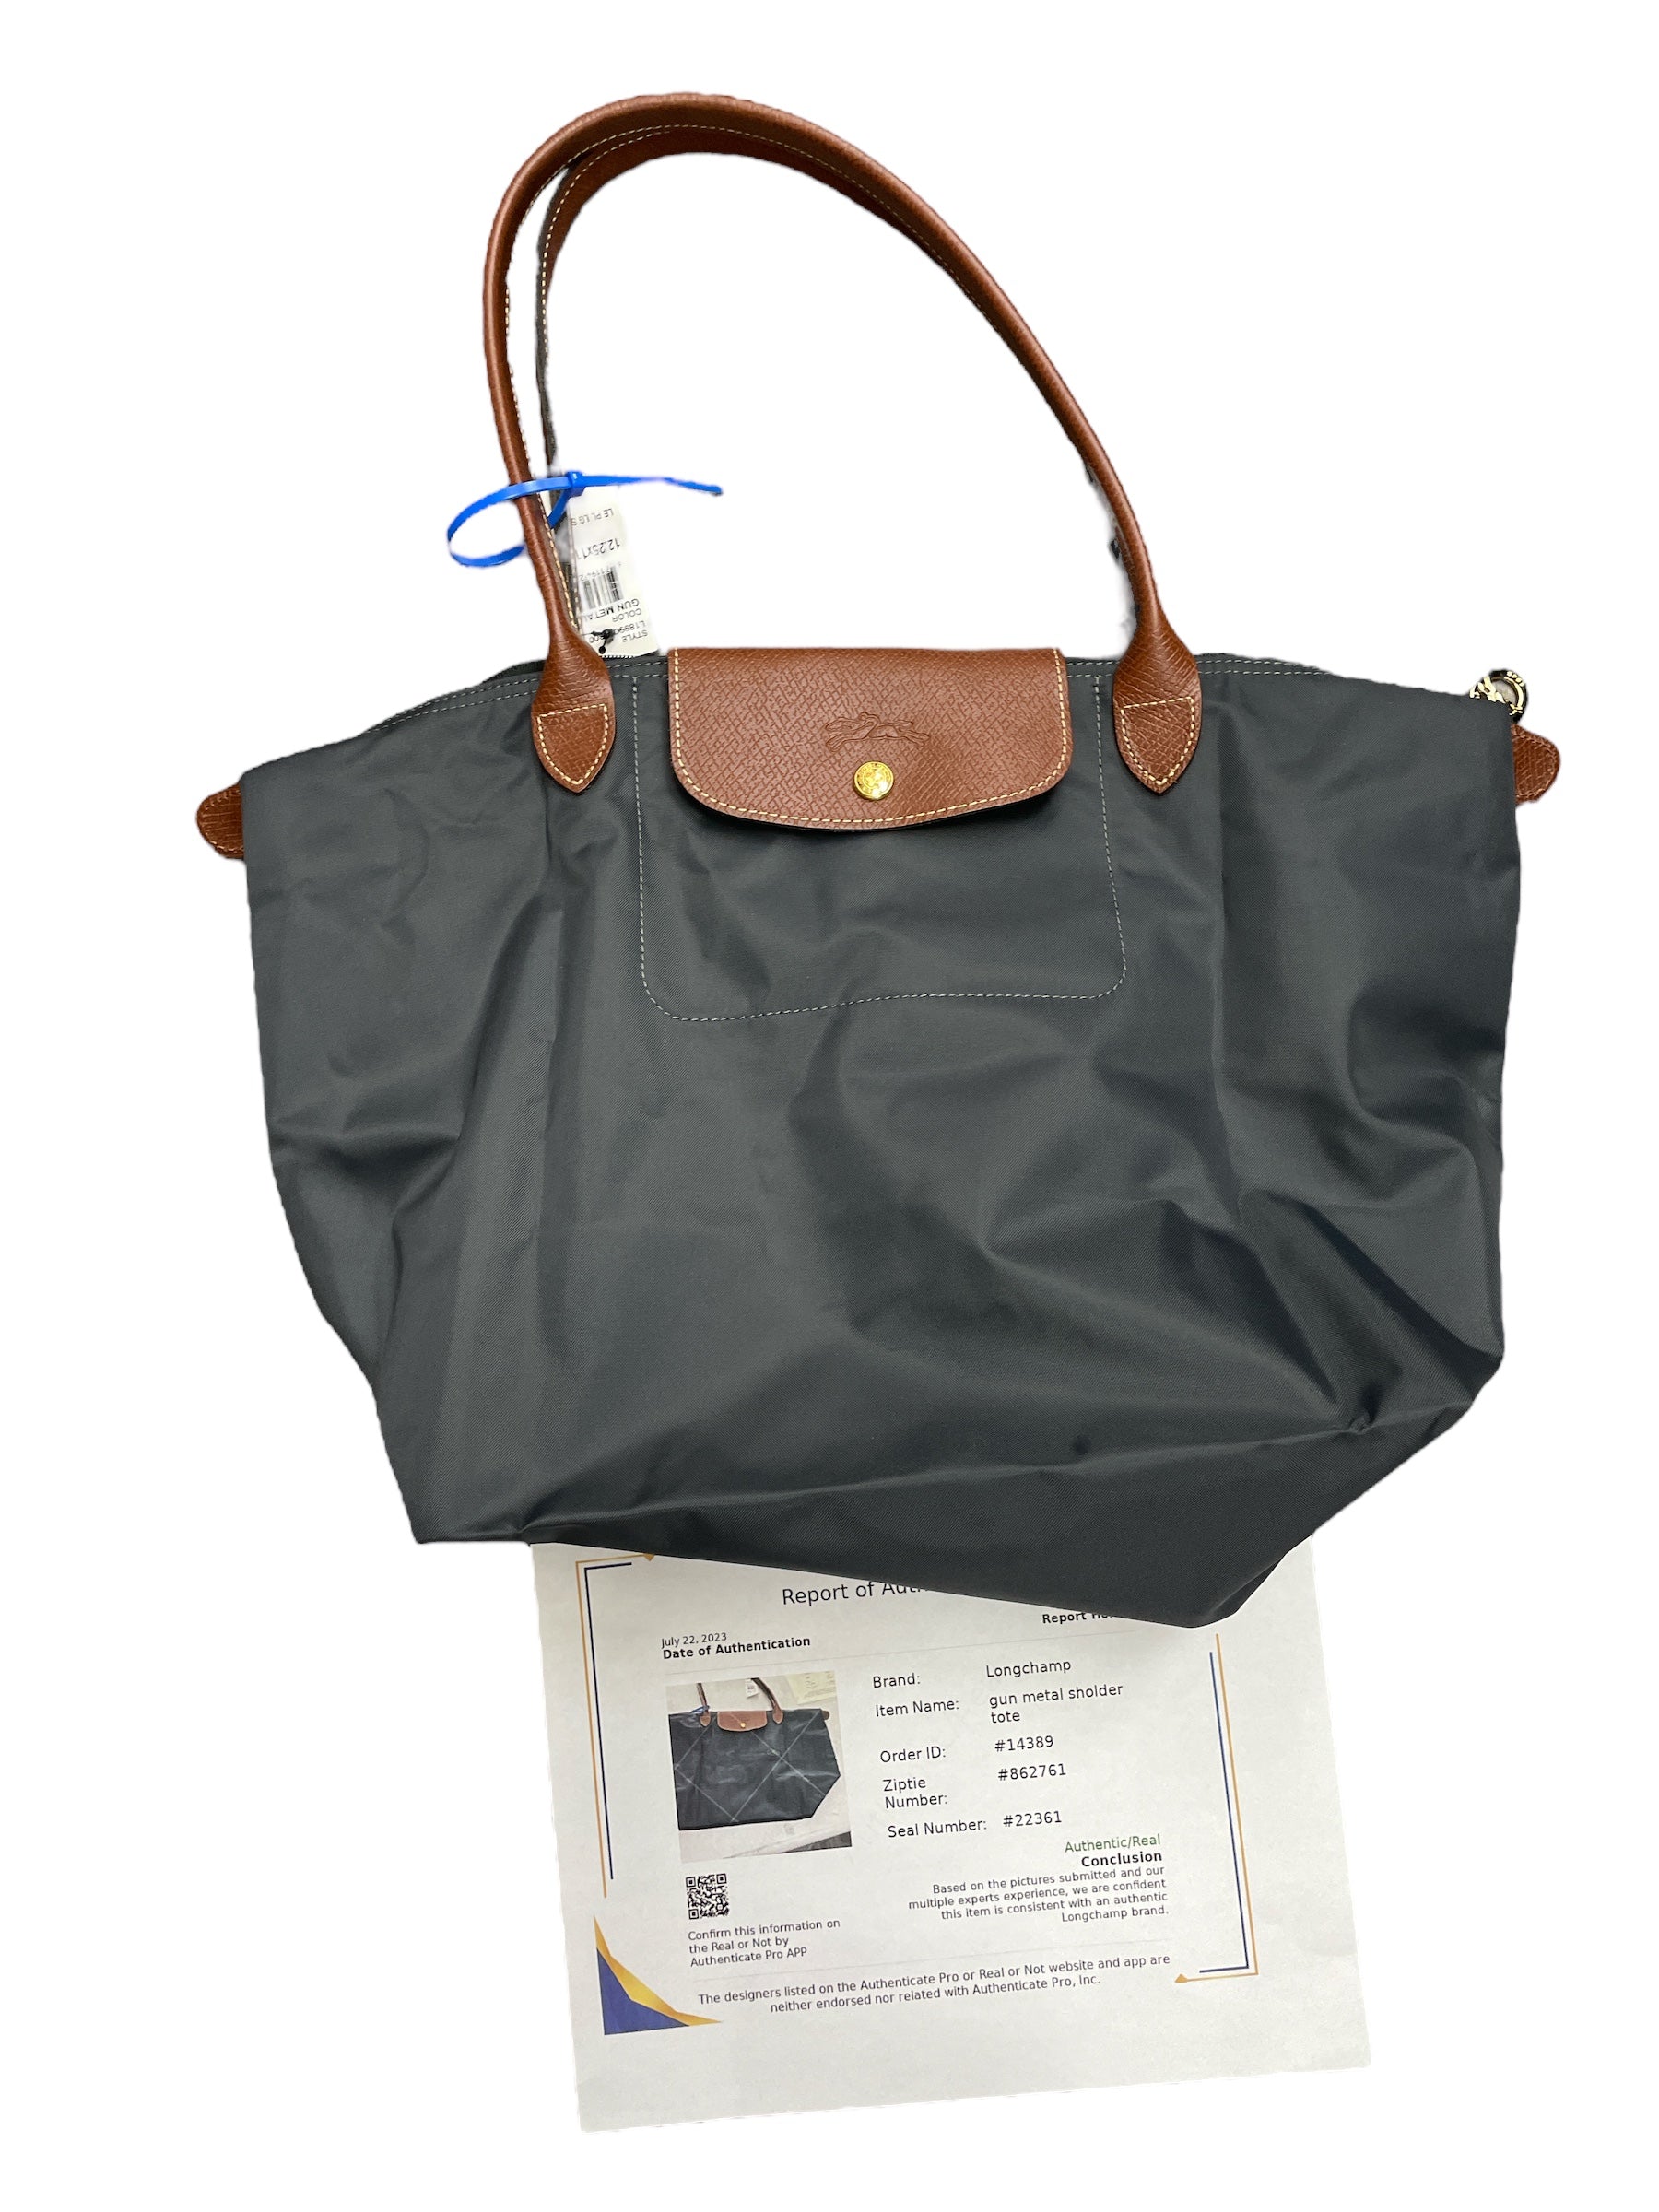 Tote Designer By Longchamp Size: Medium – Clothes Mentor Orland Park IL #111